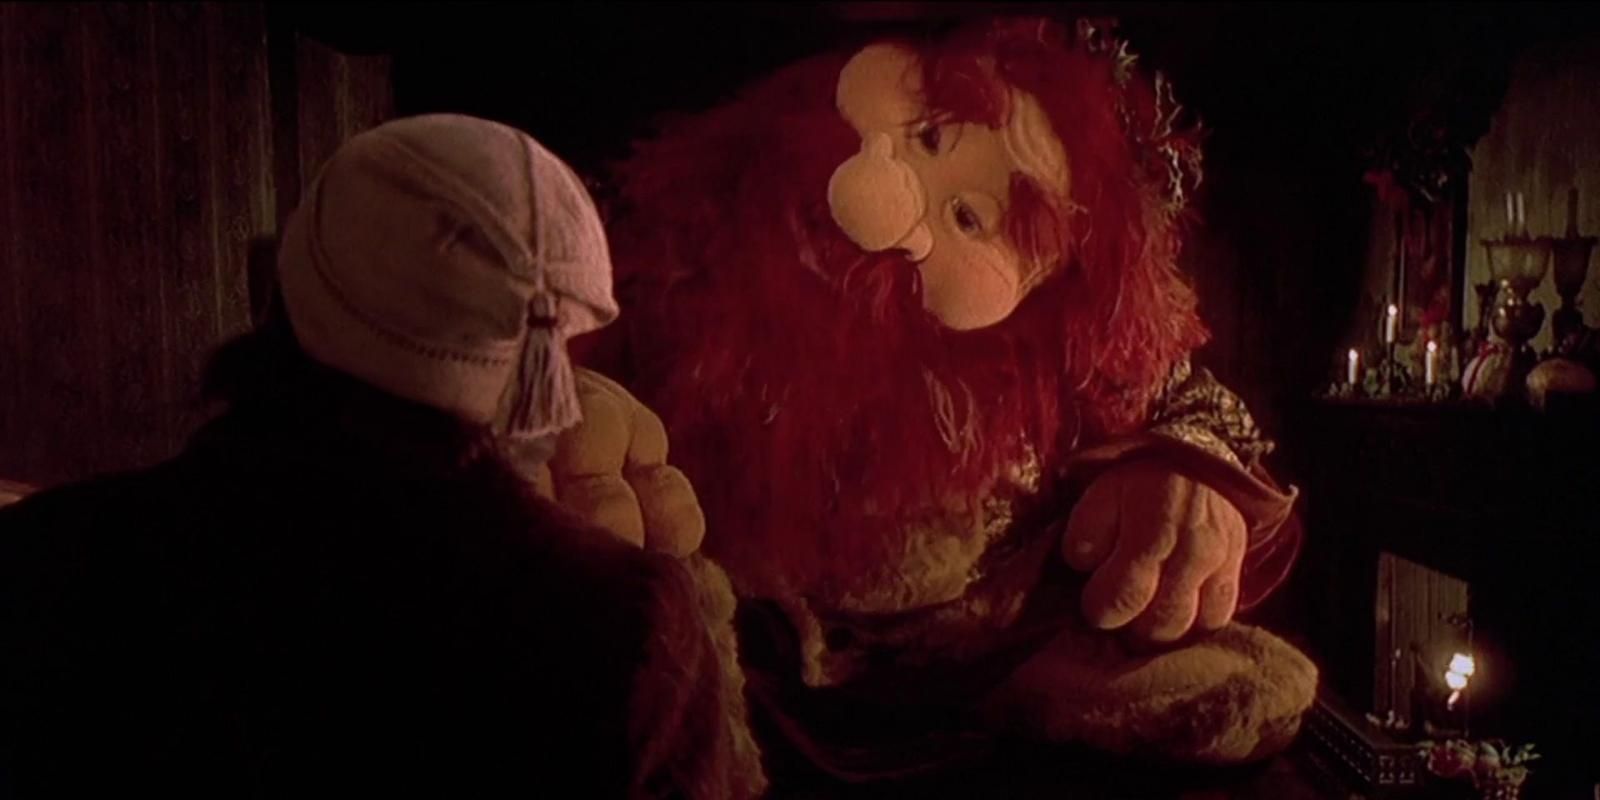 The Ghost of Christmas Present smiles at Ebenezer Scrooge in The Muppet Christmas Carol